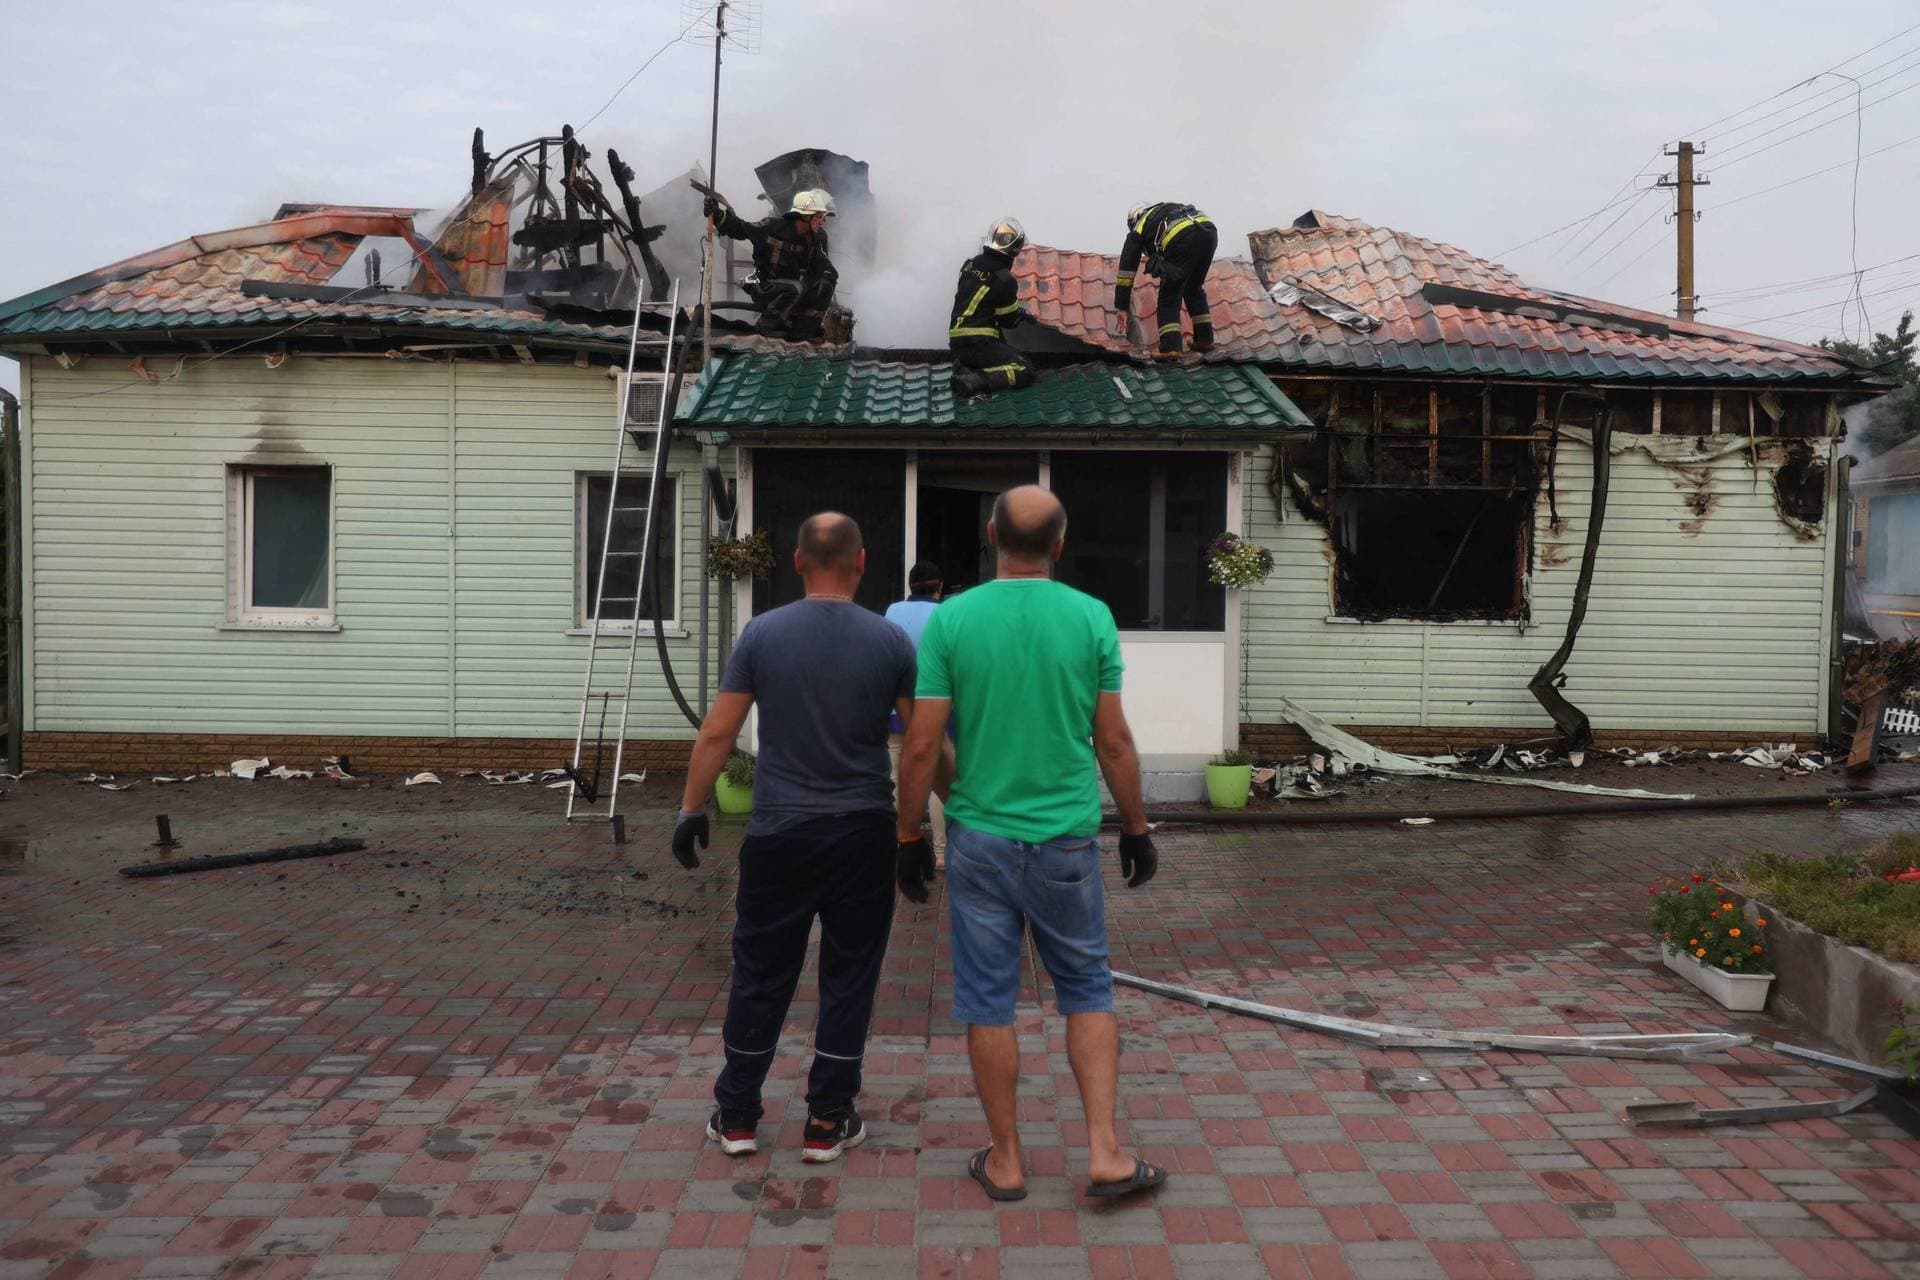 A house that was damaged following a missile attack in a village outside Kyiv